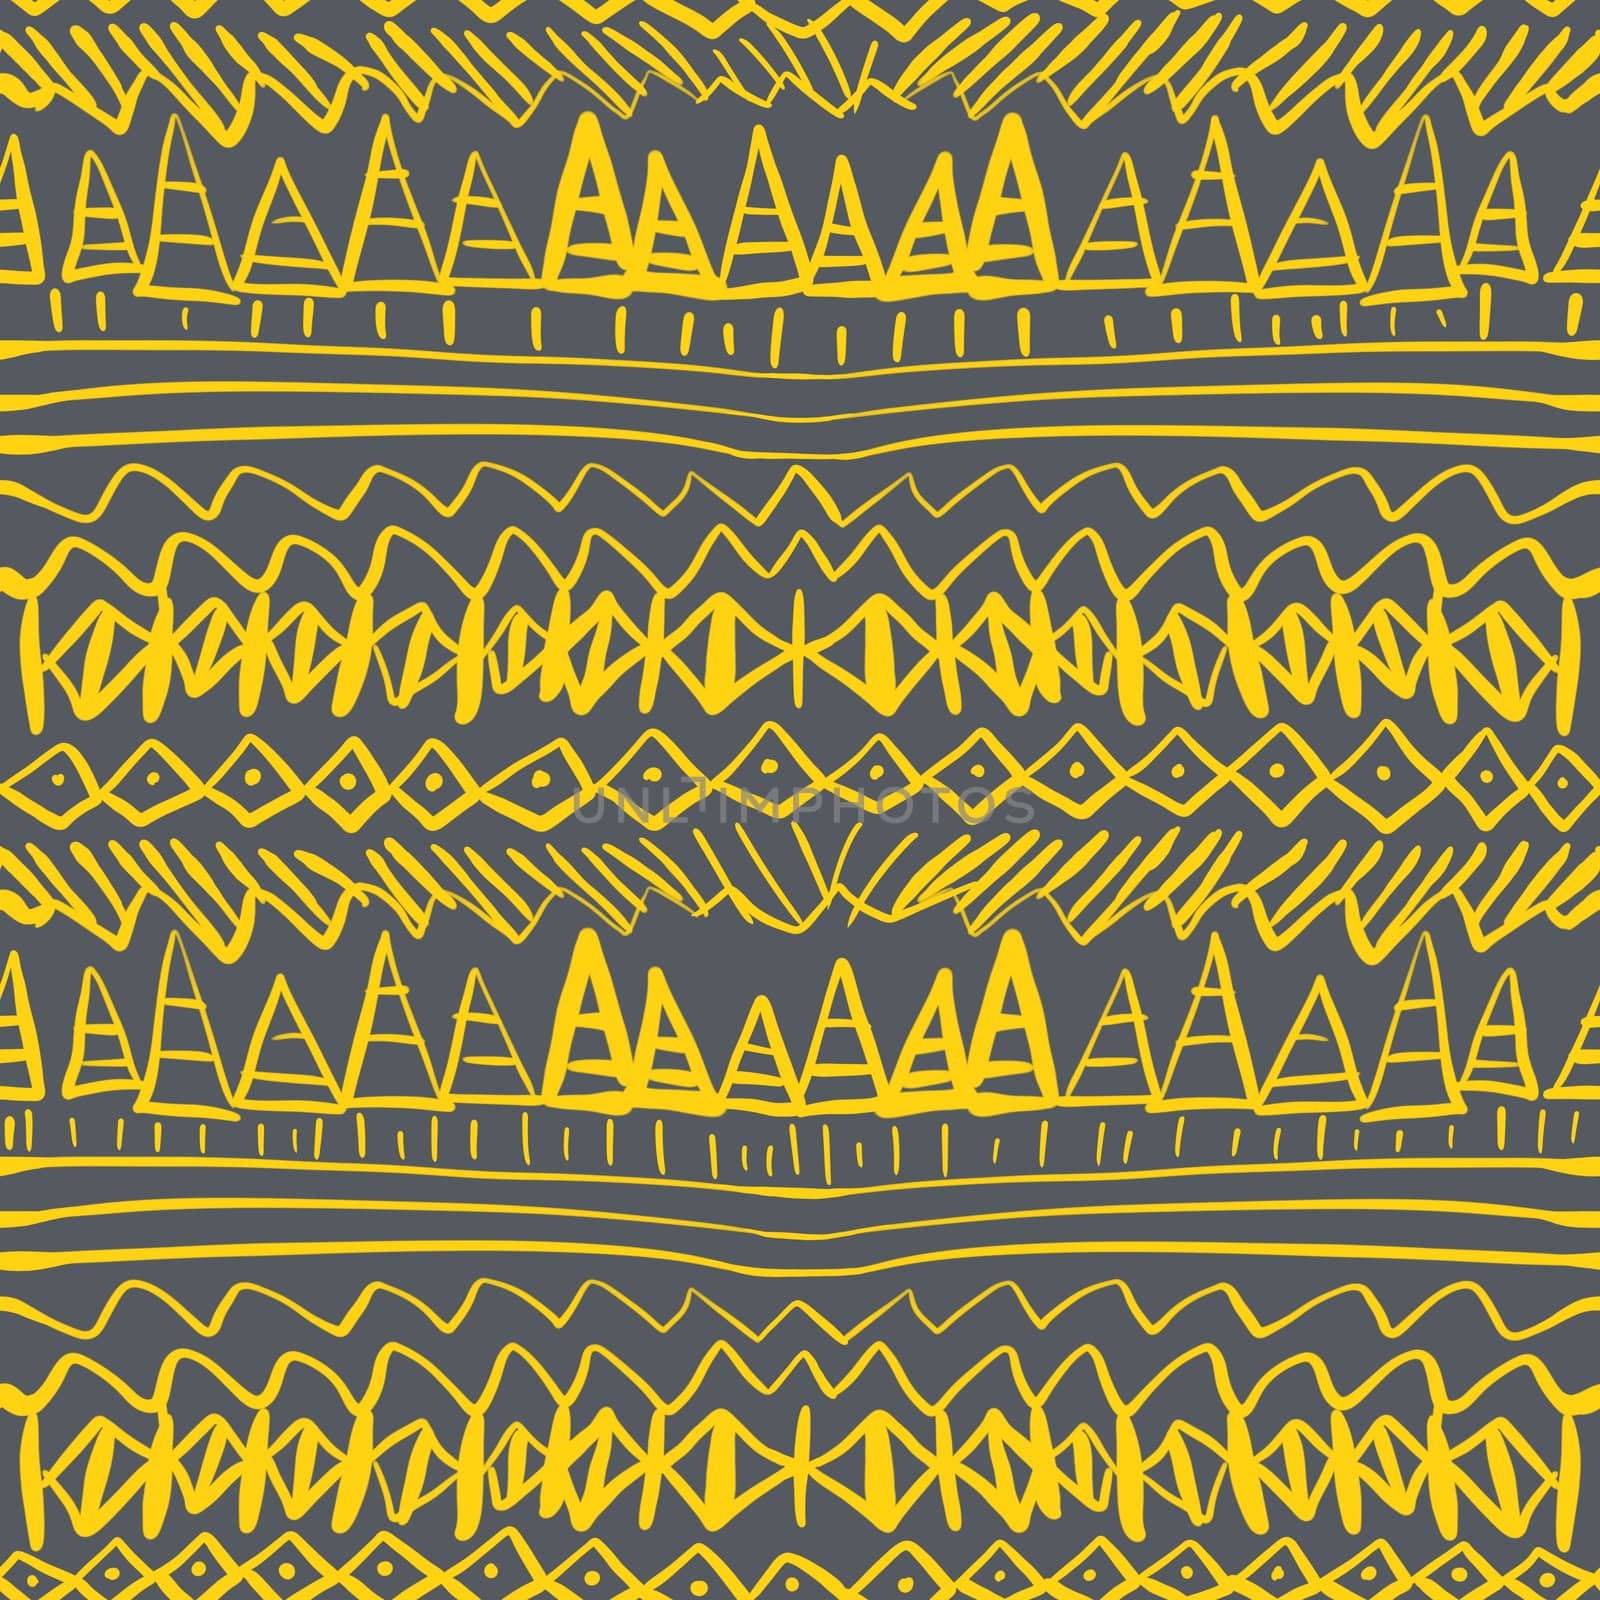 Yellow seamless ethnic and tribal pattern on black background. Hand drawn ornamental lines, geometric shapes. Endless print for textile, wrapping paper, cards.